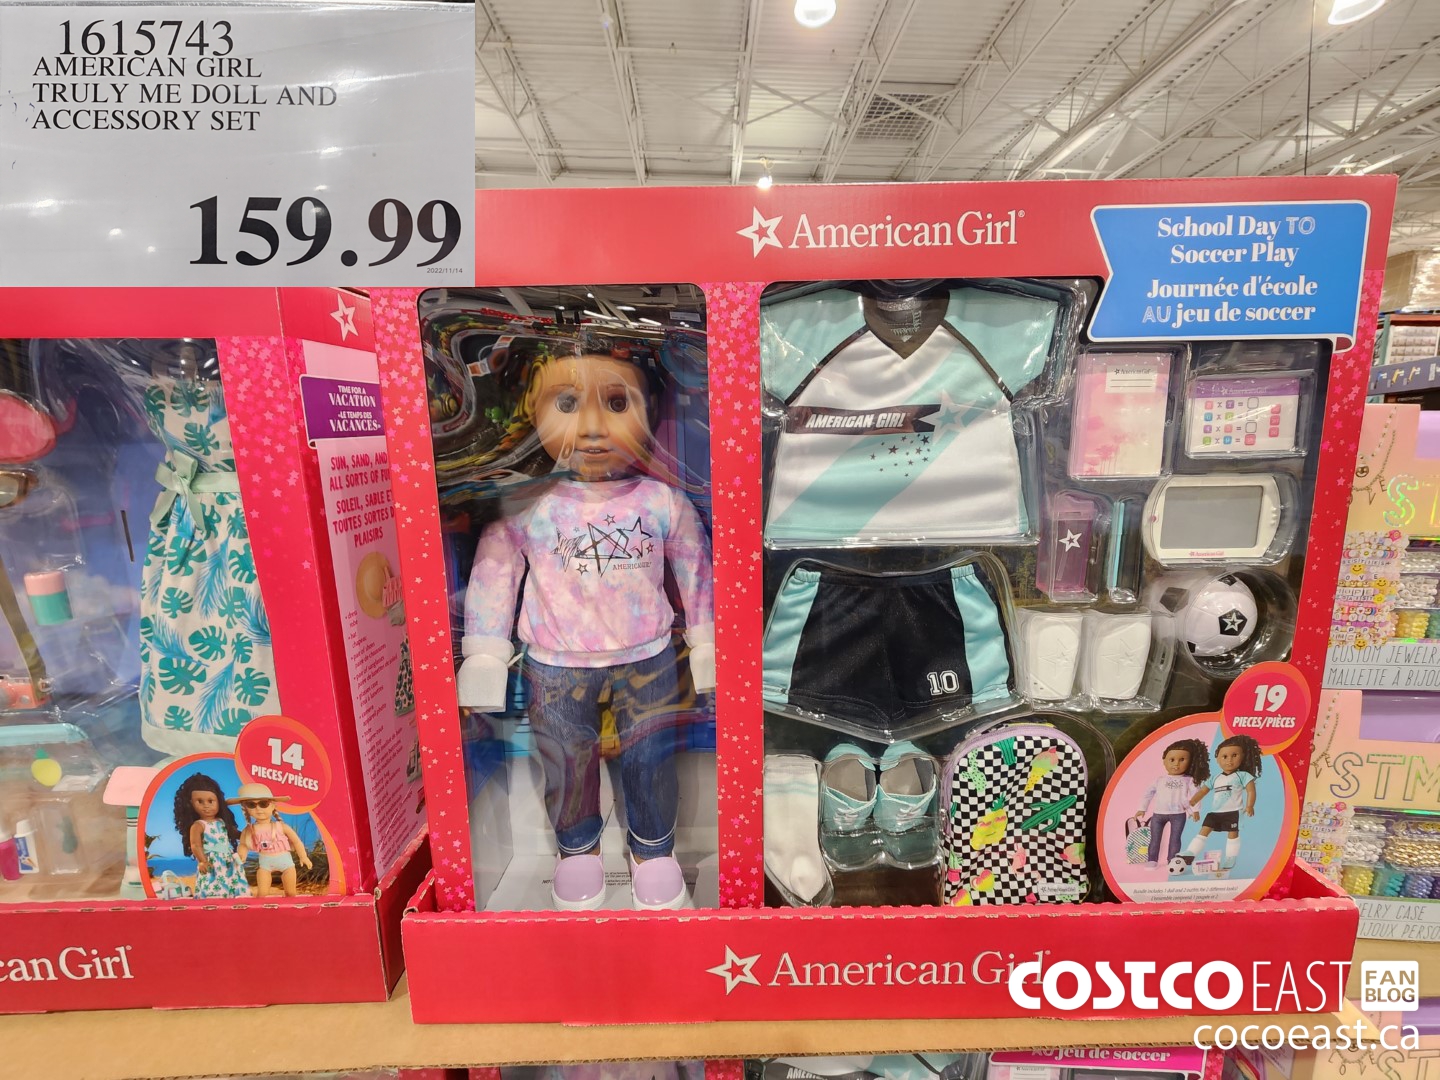 1615743 AMERICAN GIRL TRULY ME DOLL AND ACCESSORY SET 159 99 - Costco East  Fan Blog